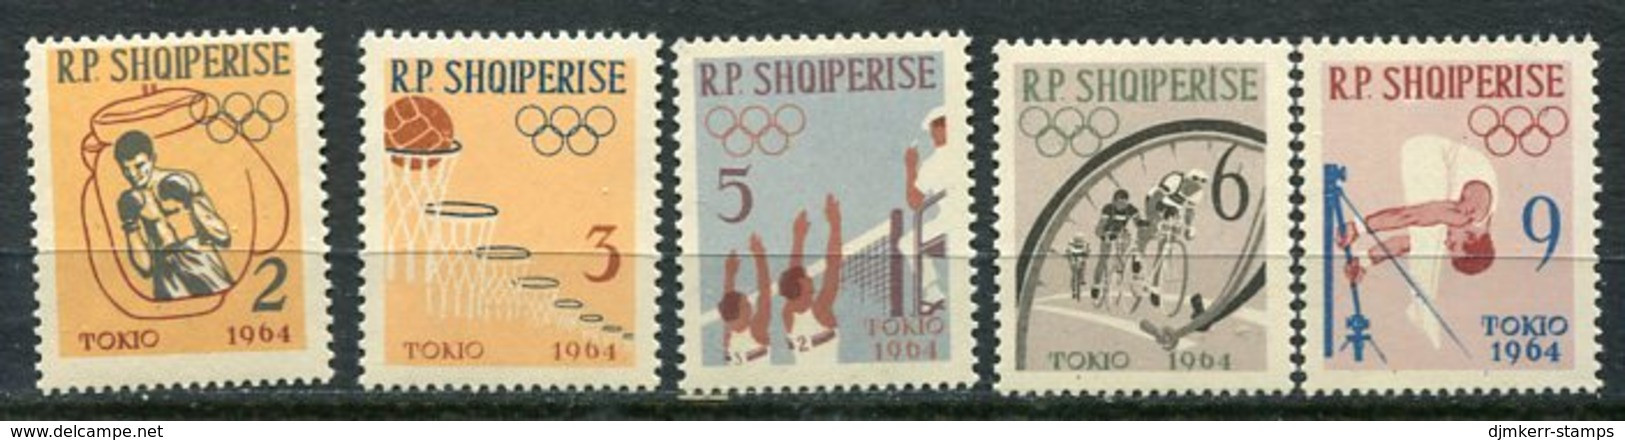 ALBANIA 1963 Olympic Games Perforated Set MNH / **  Michel 747-51A - Albanie